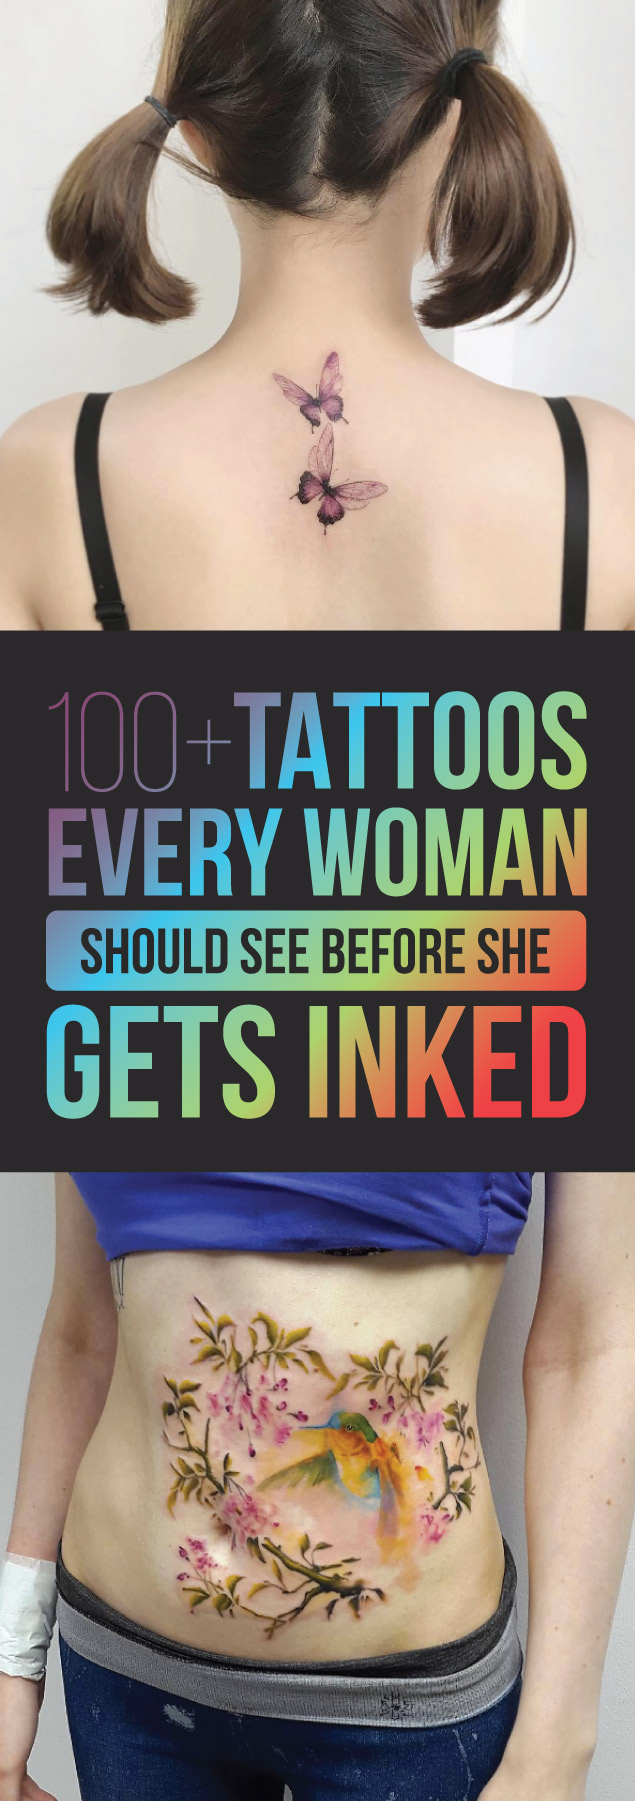 100+ Tattoos Every Woman Should See Before She Gets Inked | TattooBlend